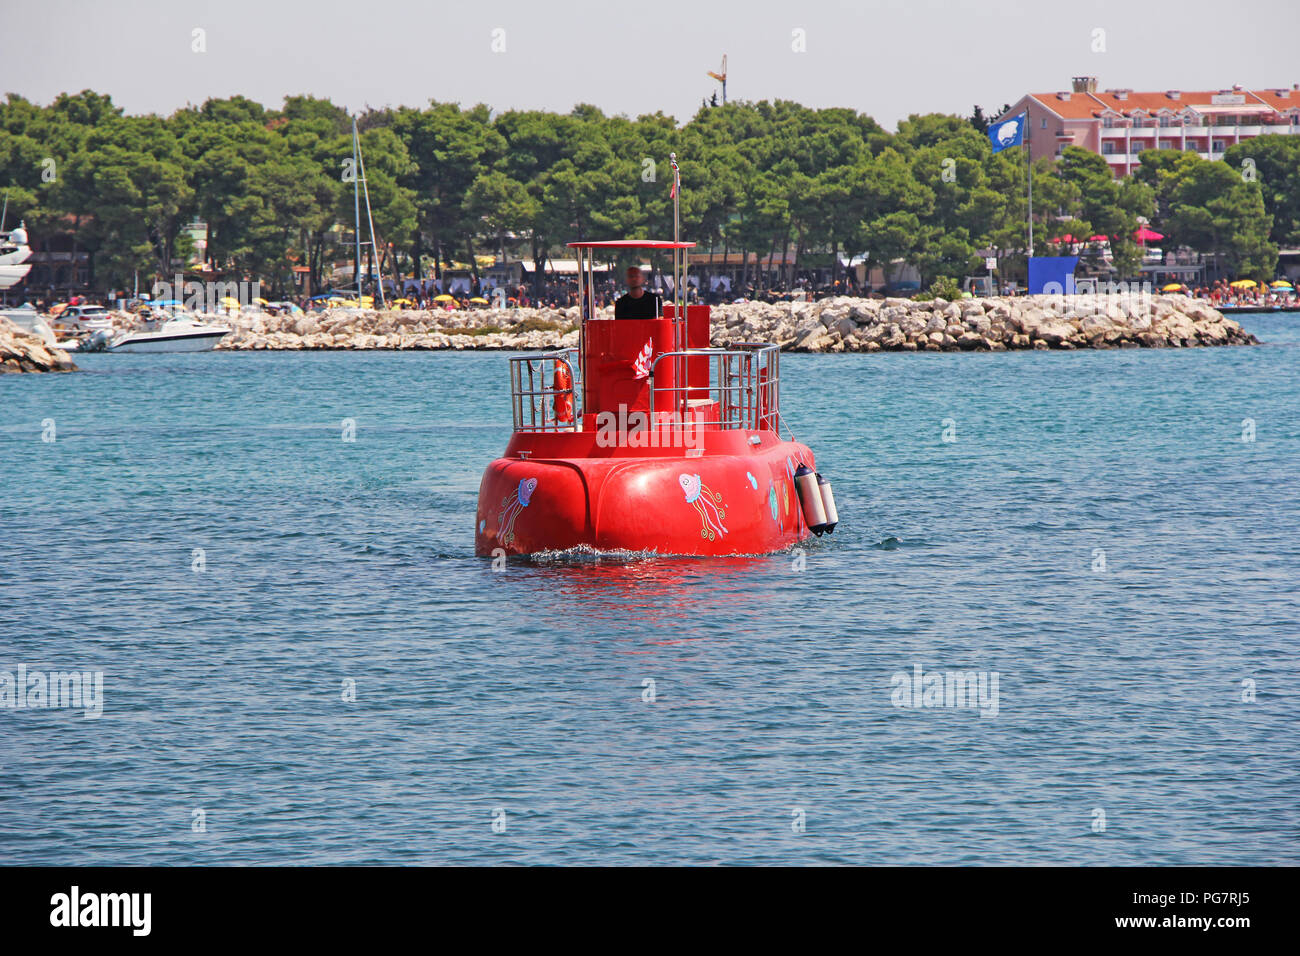 Red Semi-submarine with glass bottom so tourists can see the marine life in Vodice, Croatia Stock Photo